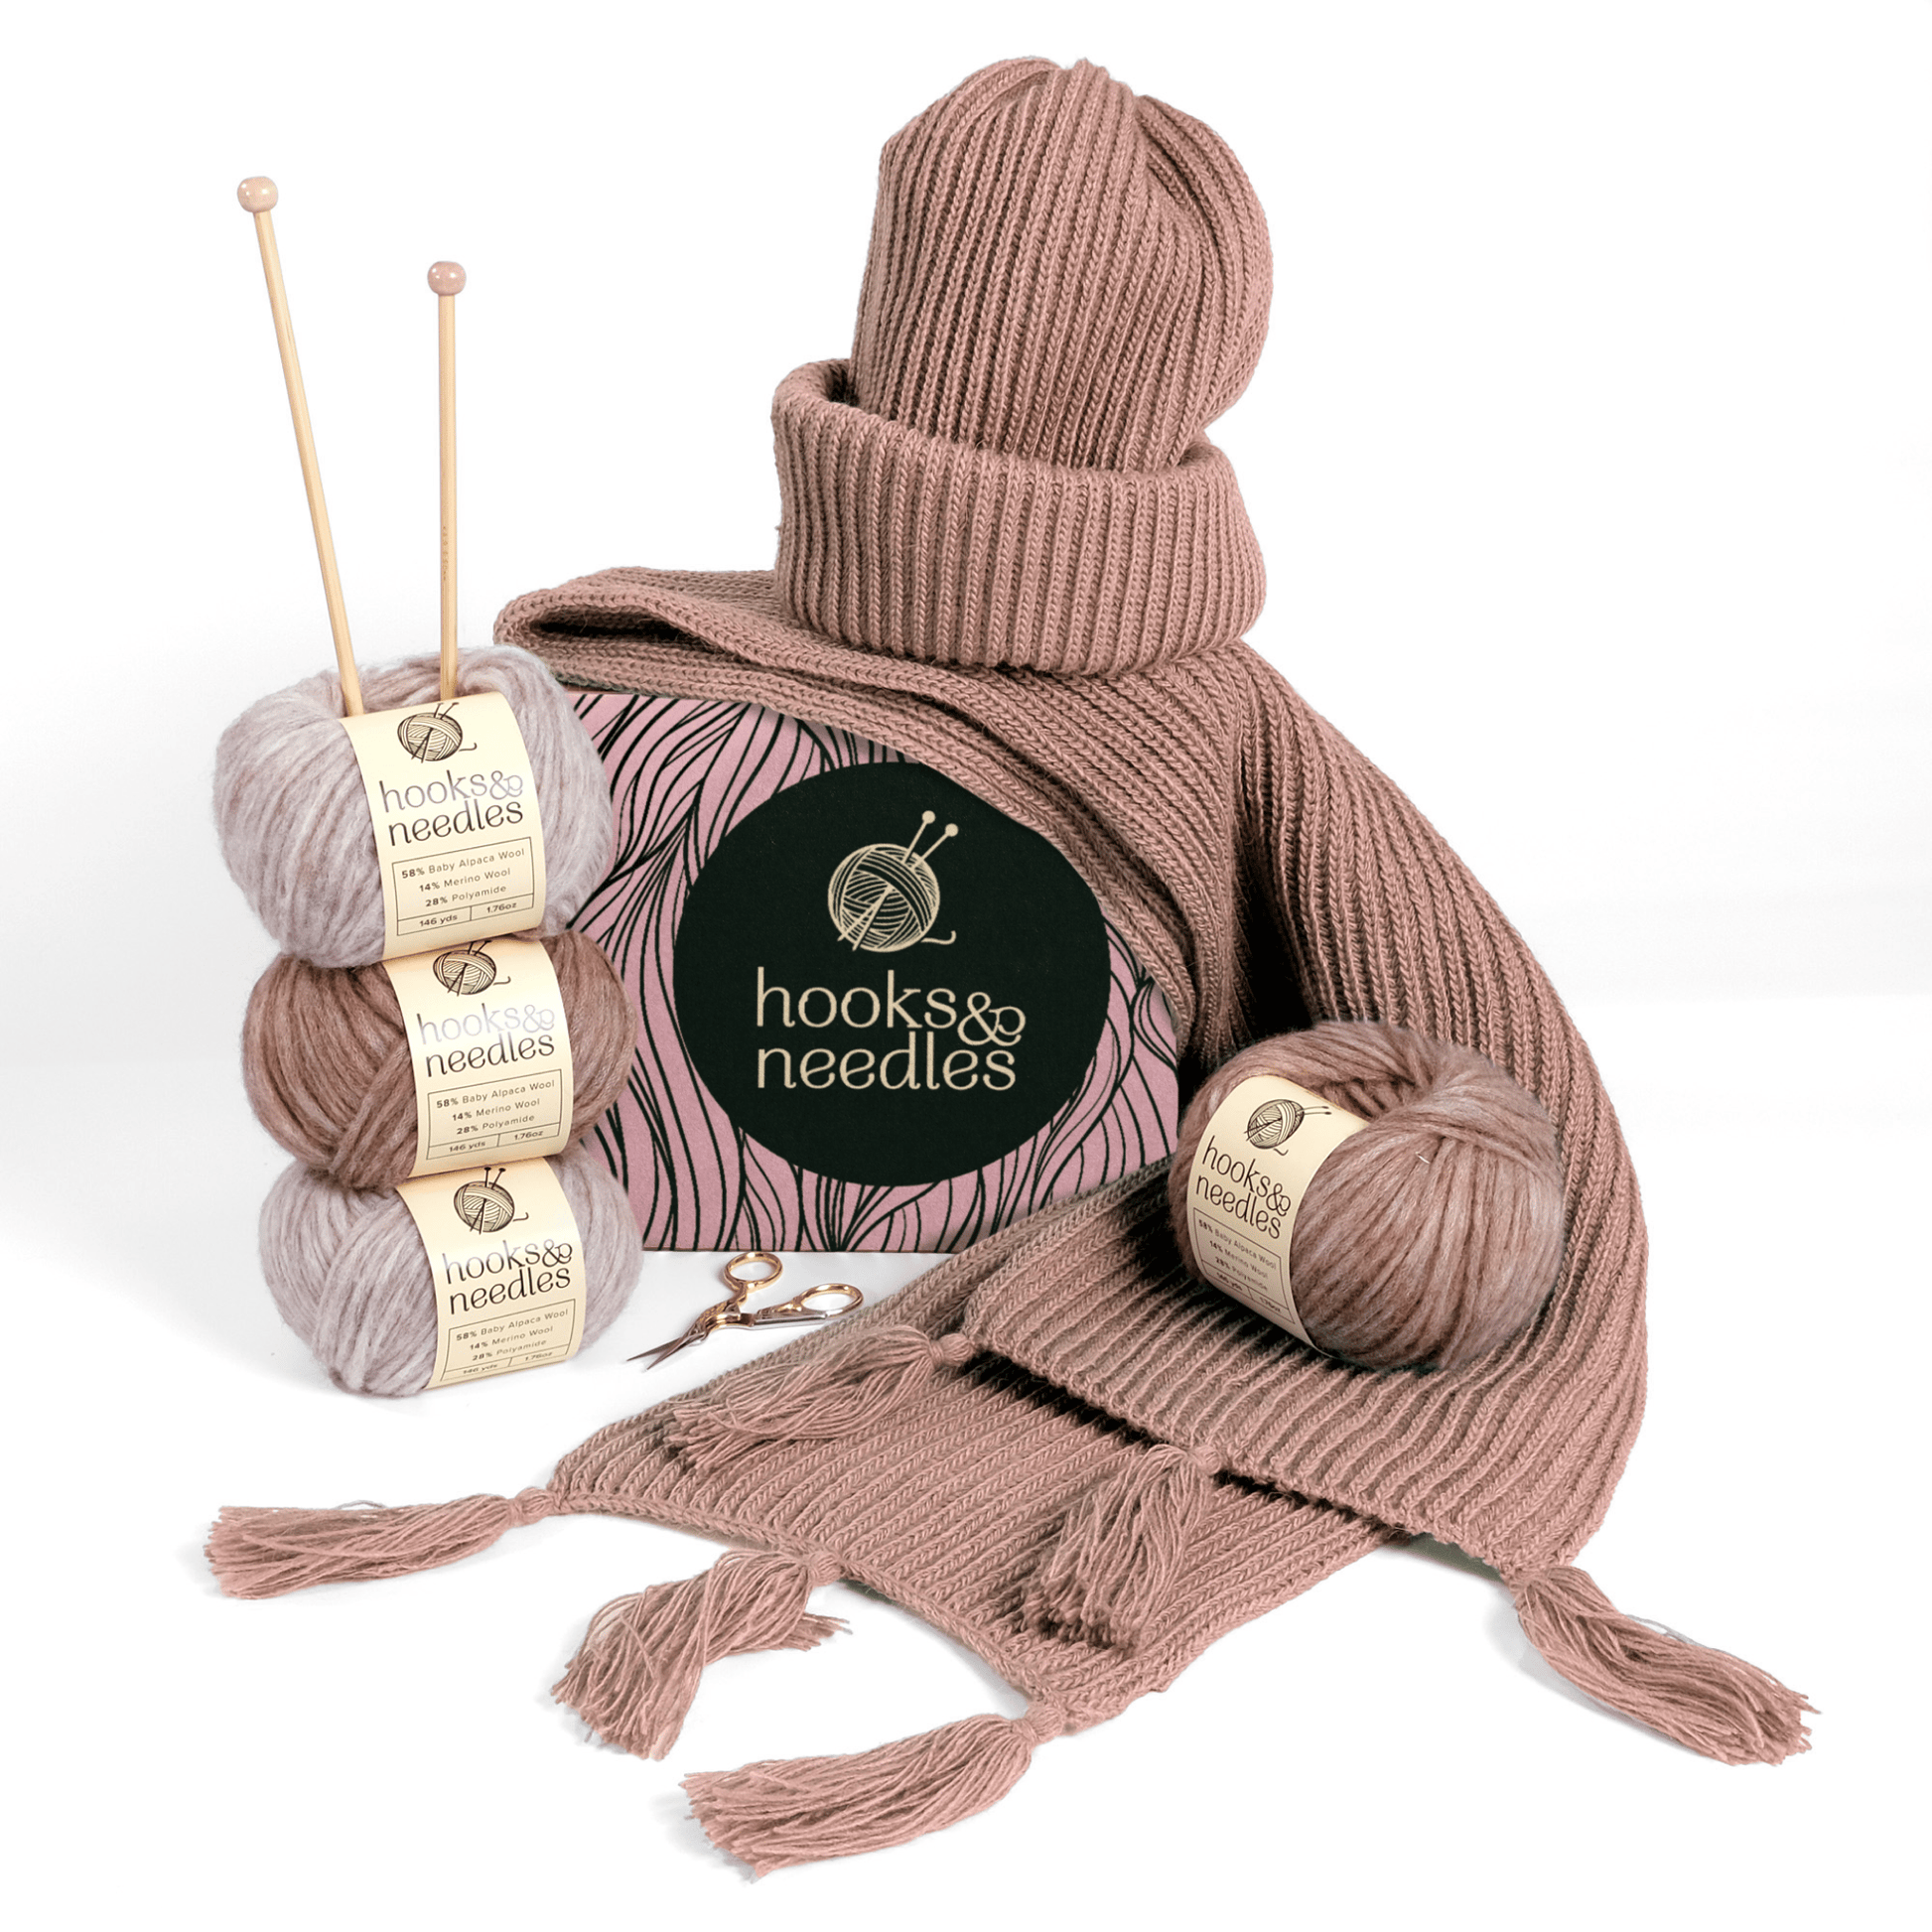 6-Month-Prepaid Hooks & Needles Subscription Box #10 with yarn, needles, and a finished sweater and scarf in muted pink tones, displayed against a white background.